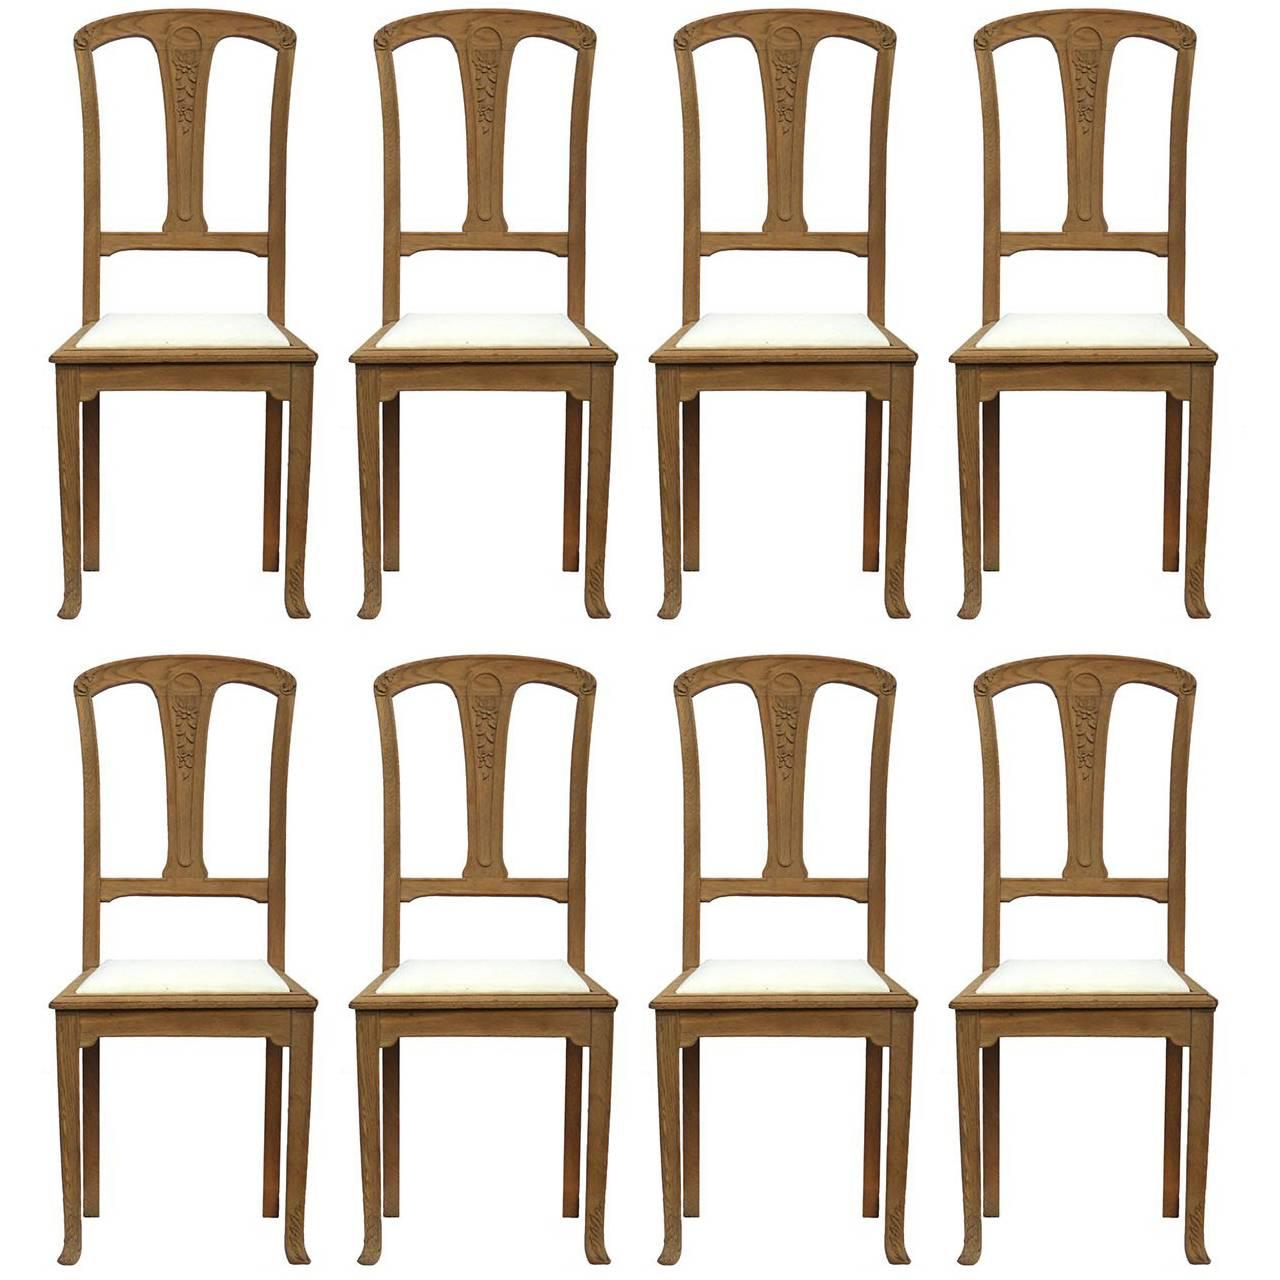 Eight Dining Chairs French Art Nouveau Arts & Crafts Bleached Oak, circa 1900